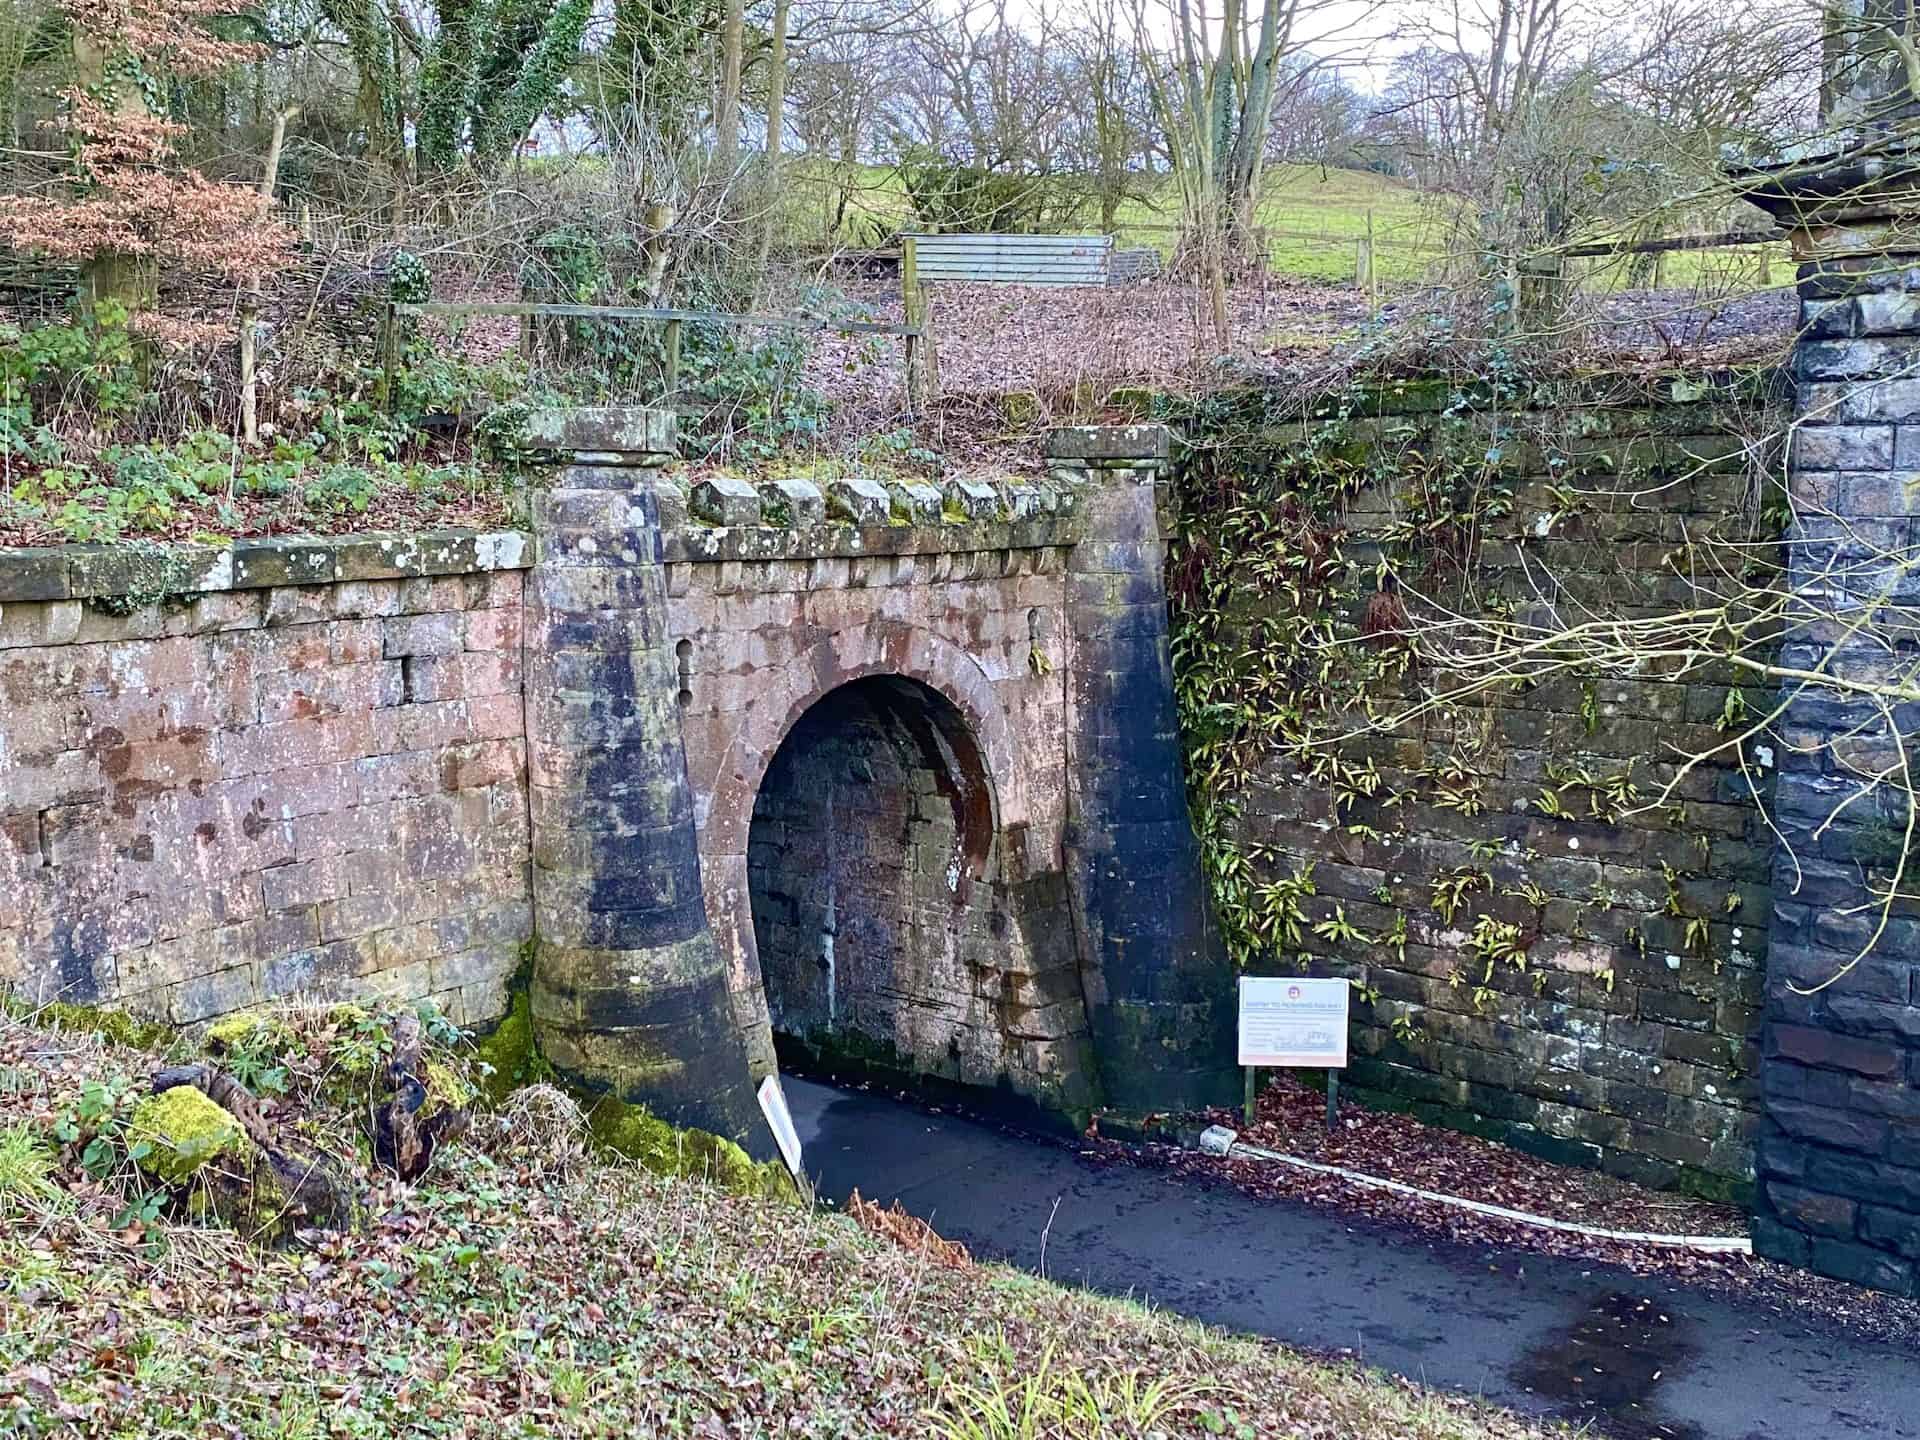 Grosmont lies on the Whitby to Pickering railway line, which was built by George Stephenson and opened over its full length on 26 May 1836. There are two adjacent railway tunnels to the south of the village. This earlier, smaller tunnel is now used as a pedestrian route through to the North York Moors Railway engine sheds.